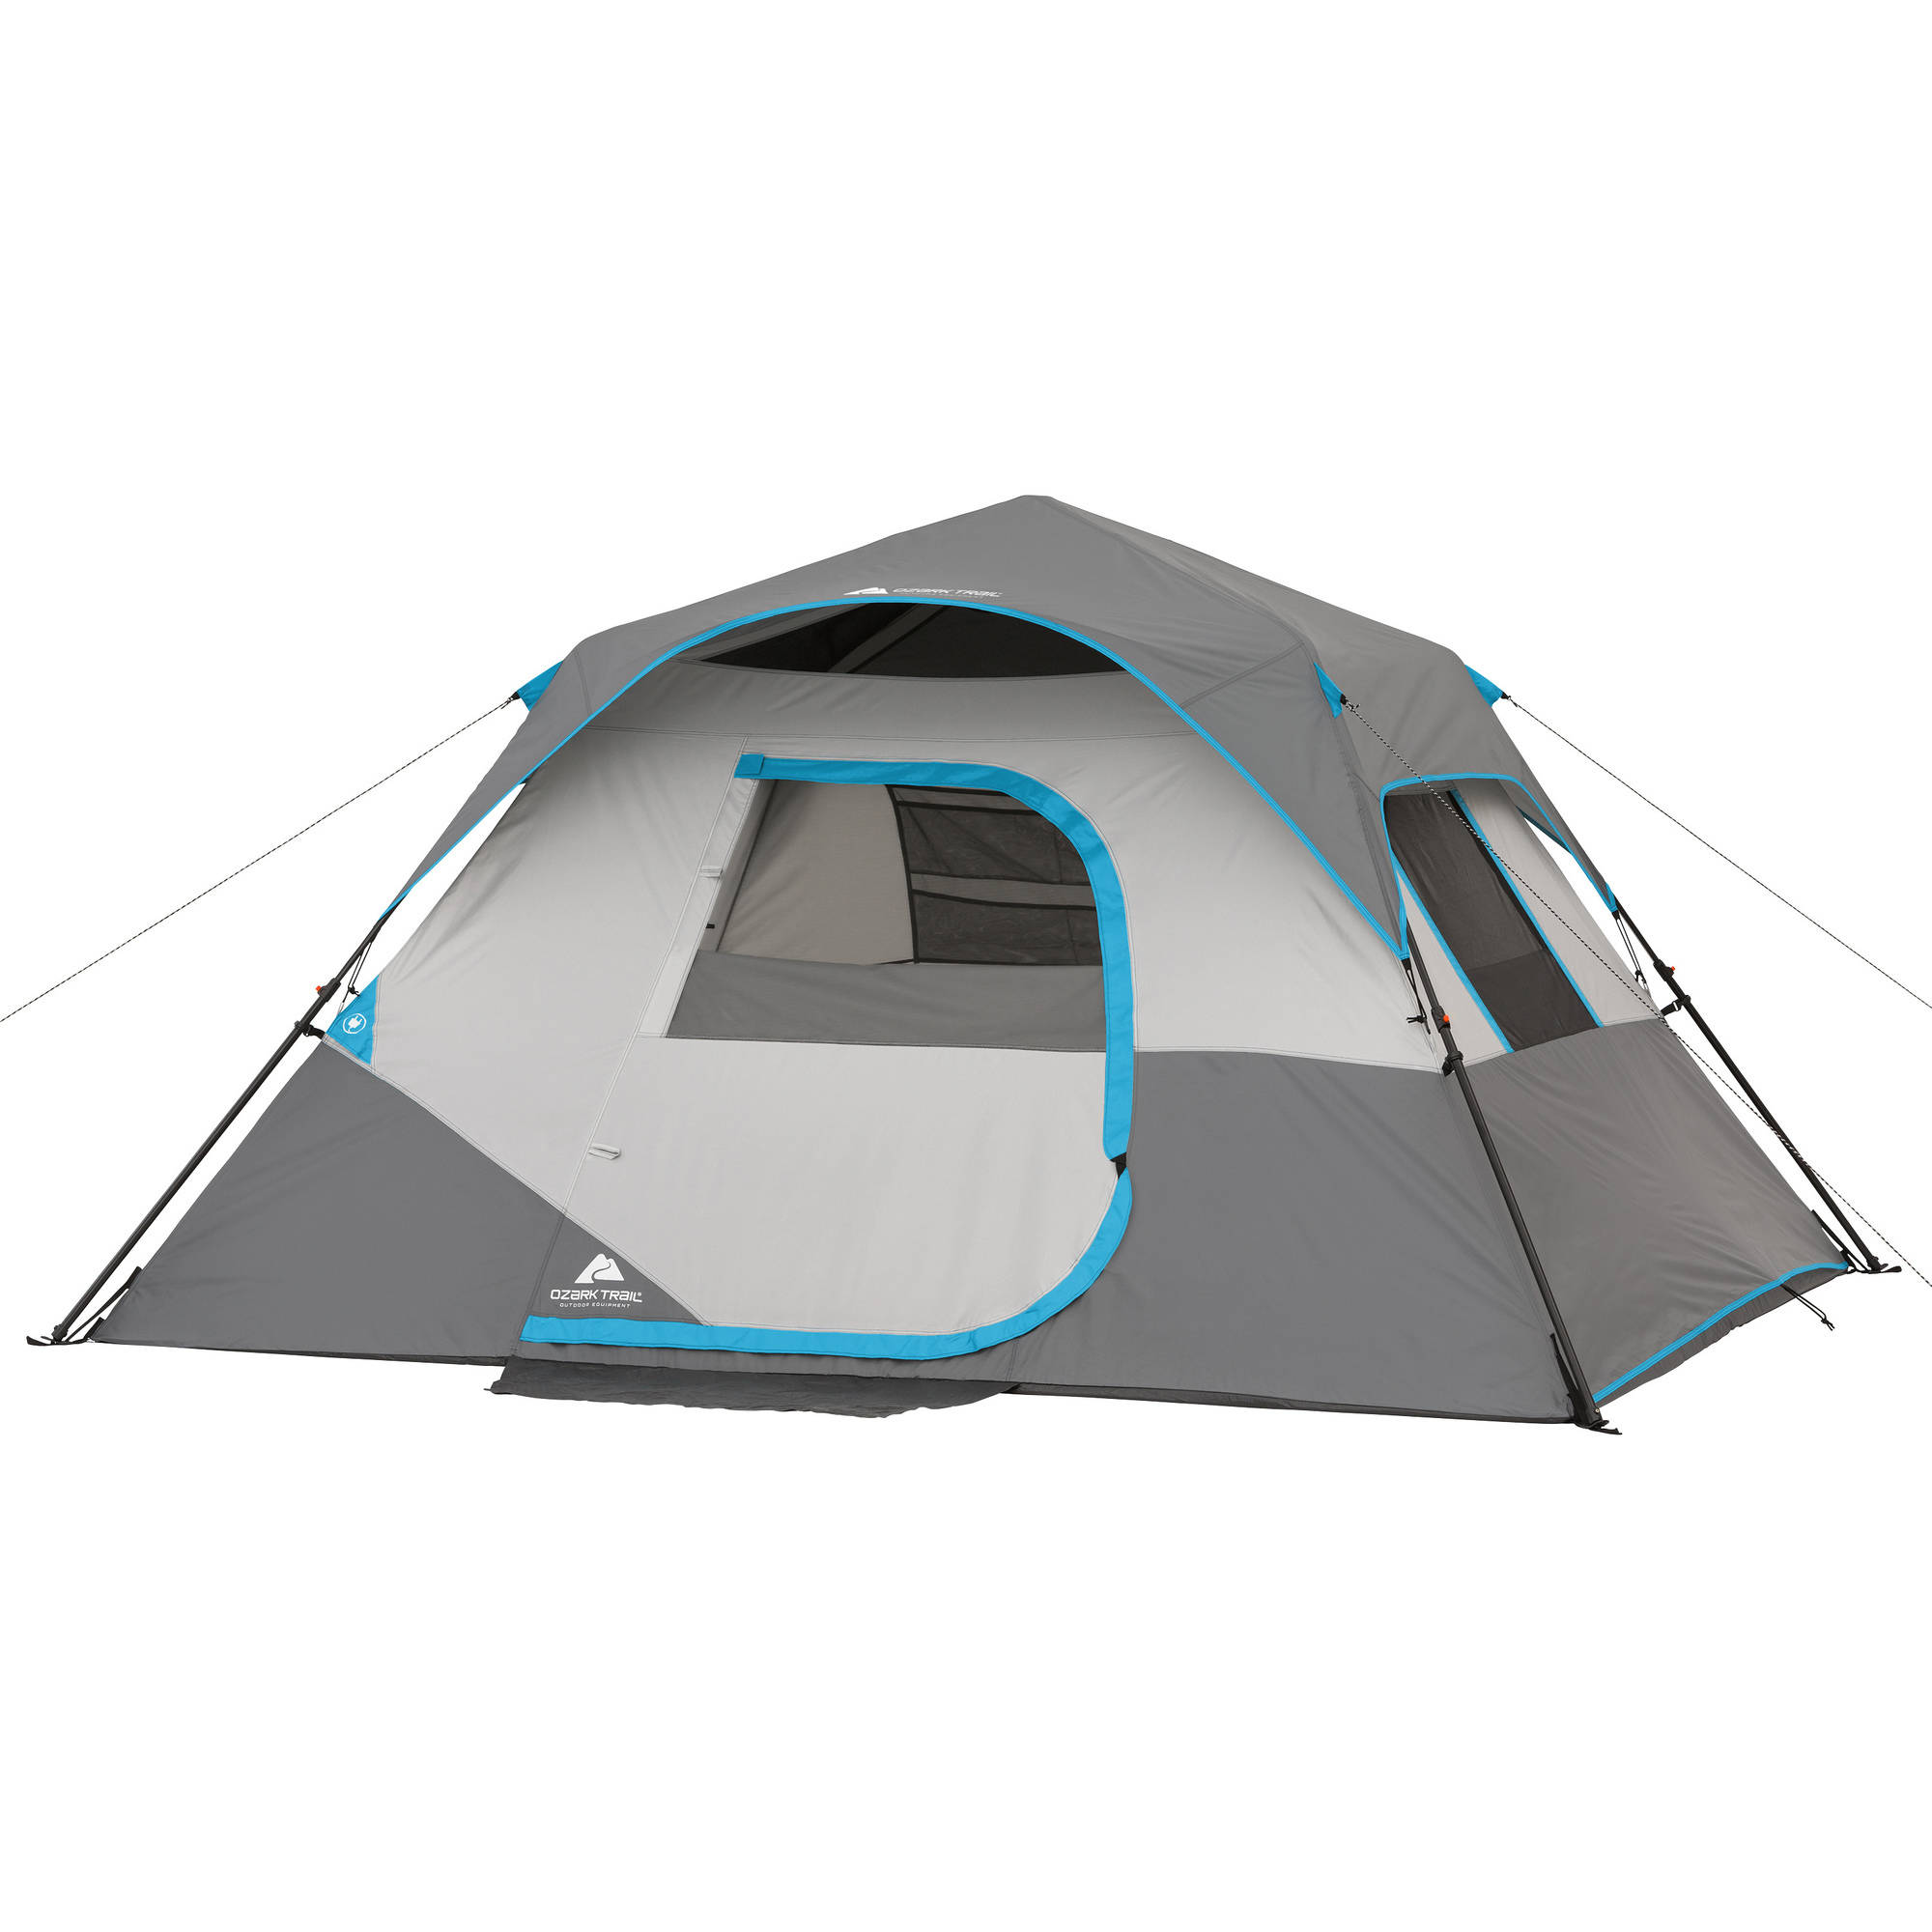 Ozark Trail 6-Person Instant Cabin Tent - image 1 of 8